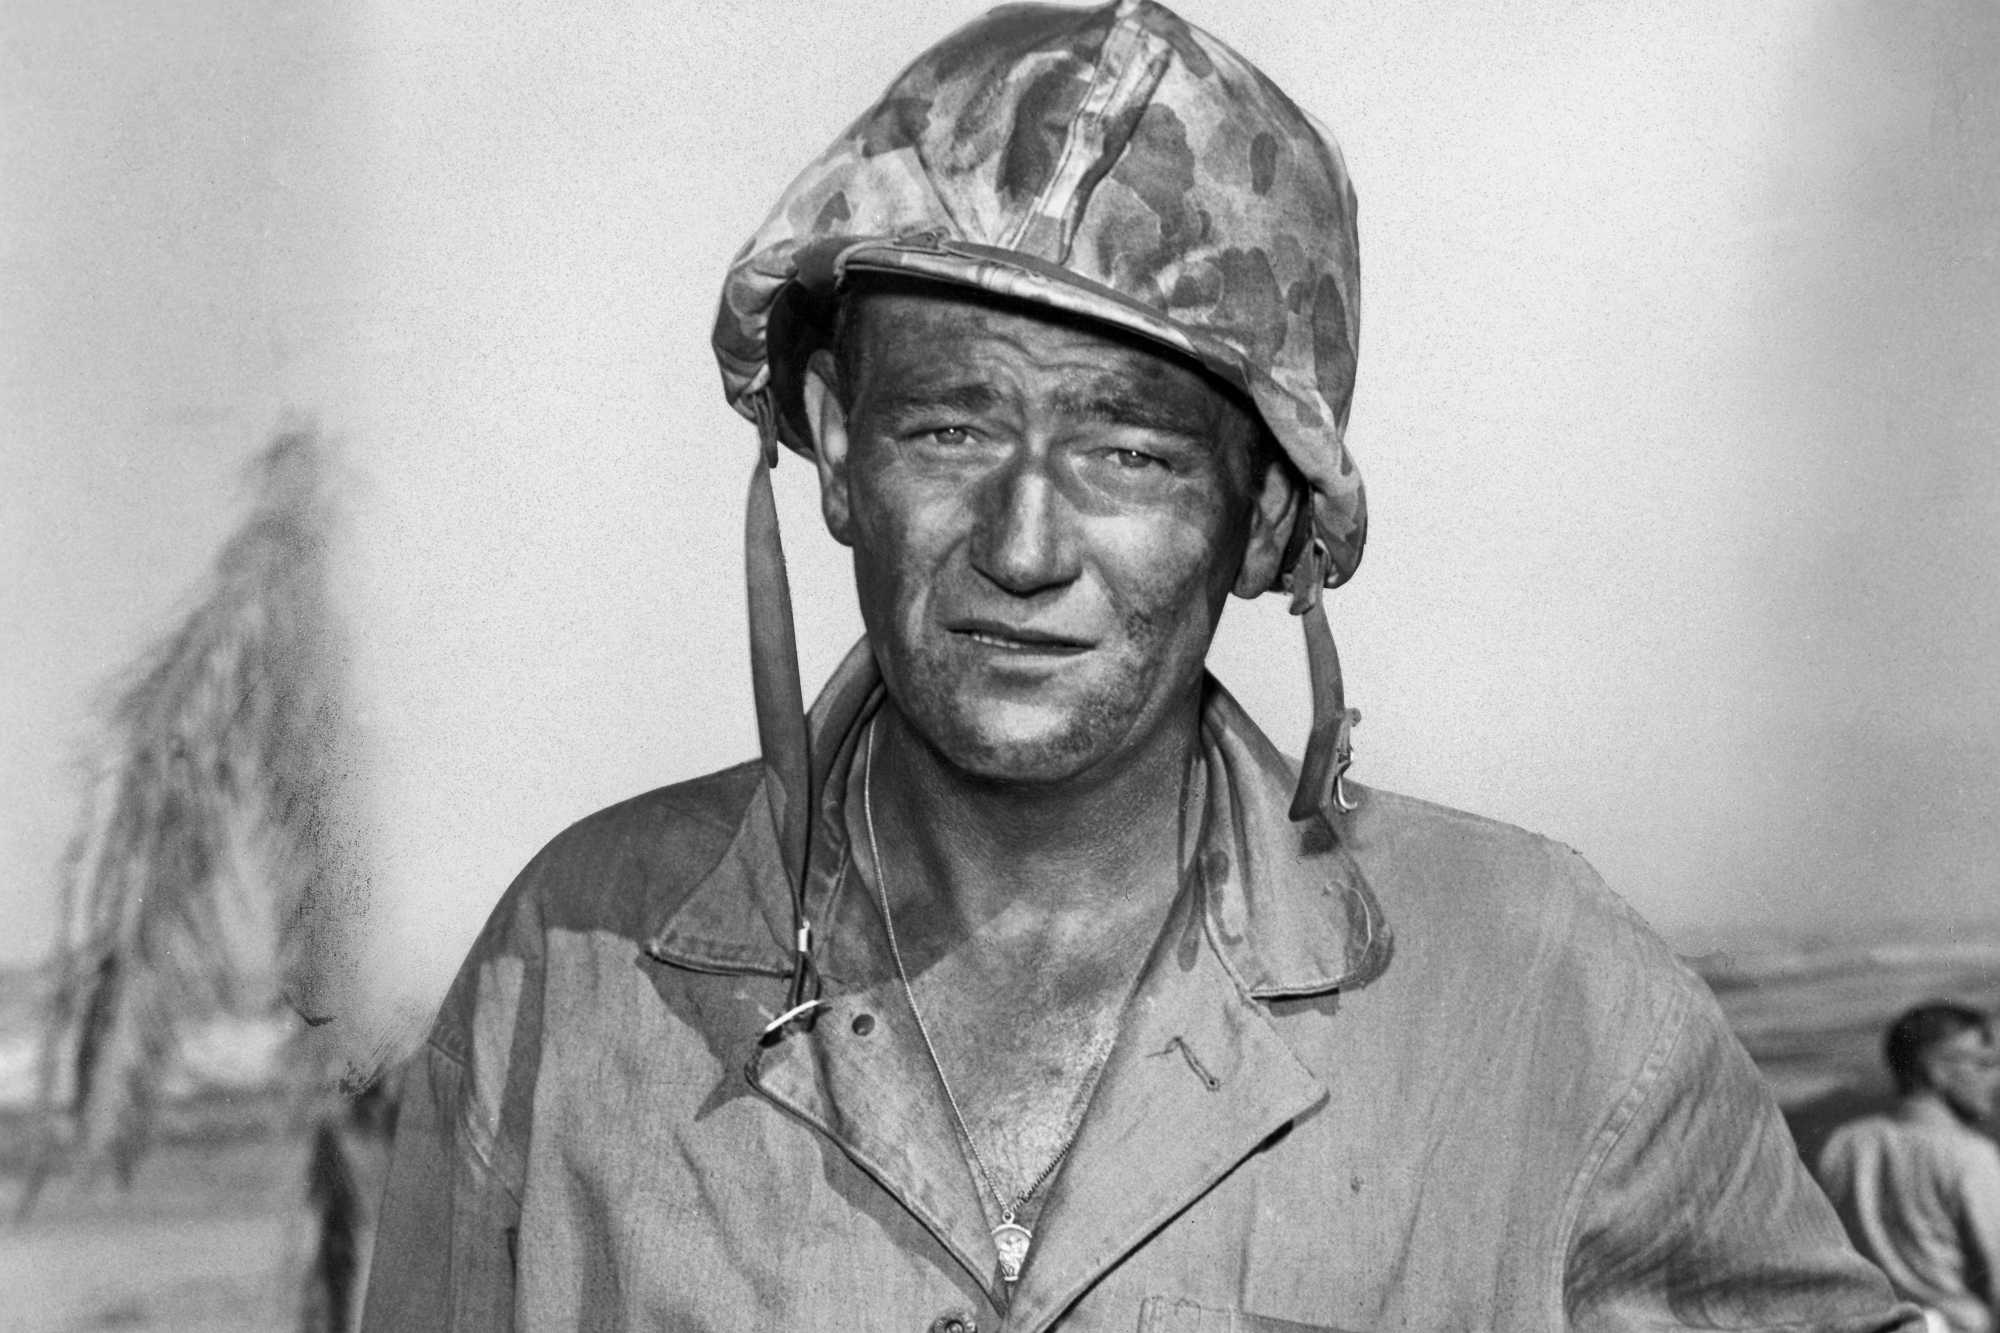 'Sands of Iwo Jima' John Wayne as Sgt. John M. Stryker looking ahead in a black-and-white picture wearing his Army uniform